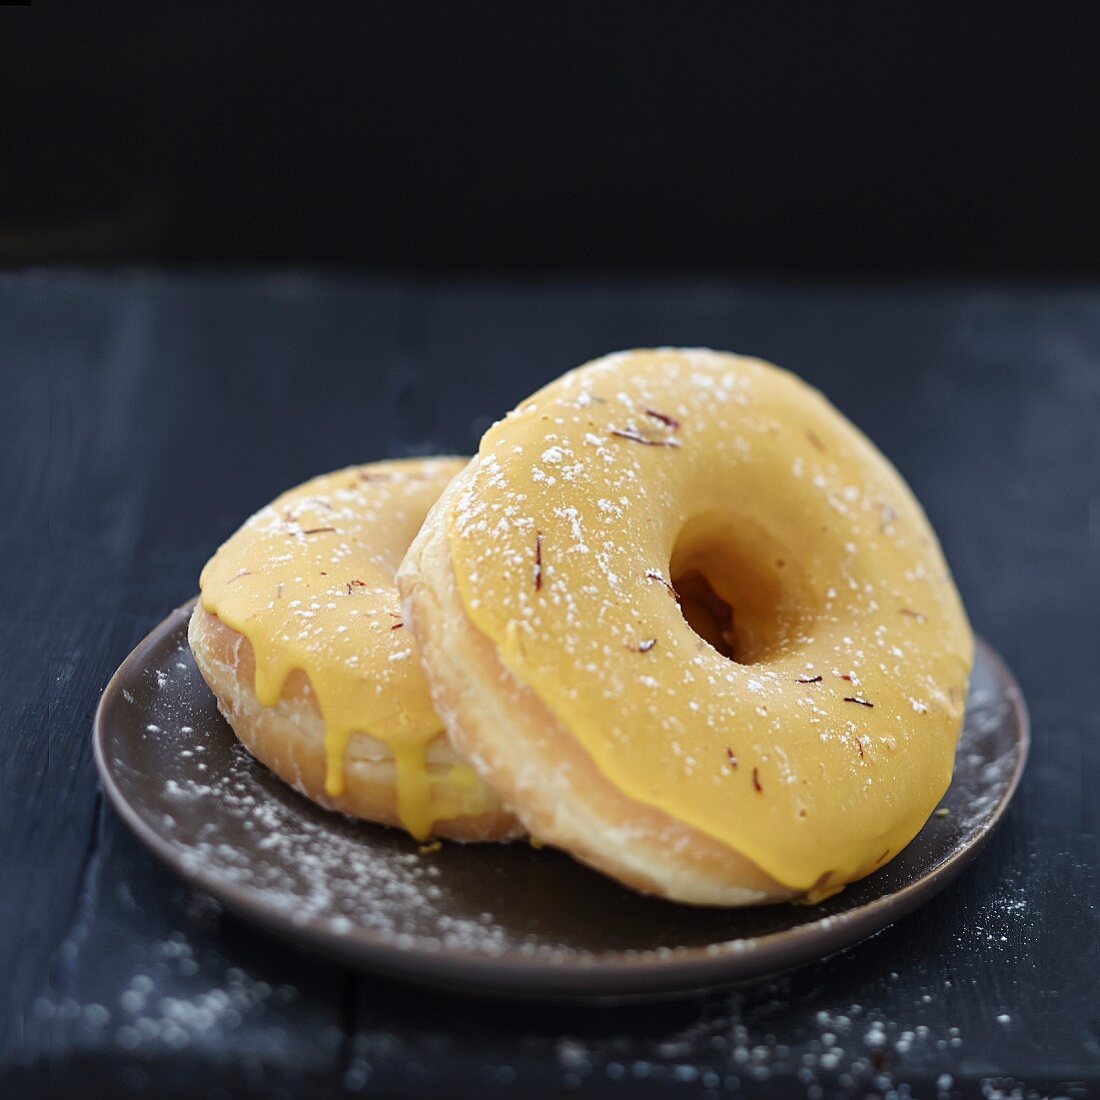 Ginger and saffron donuts